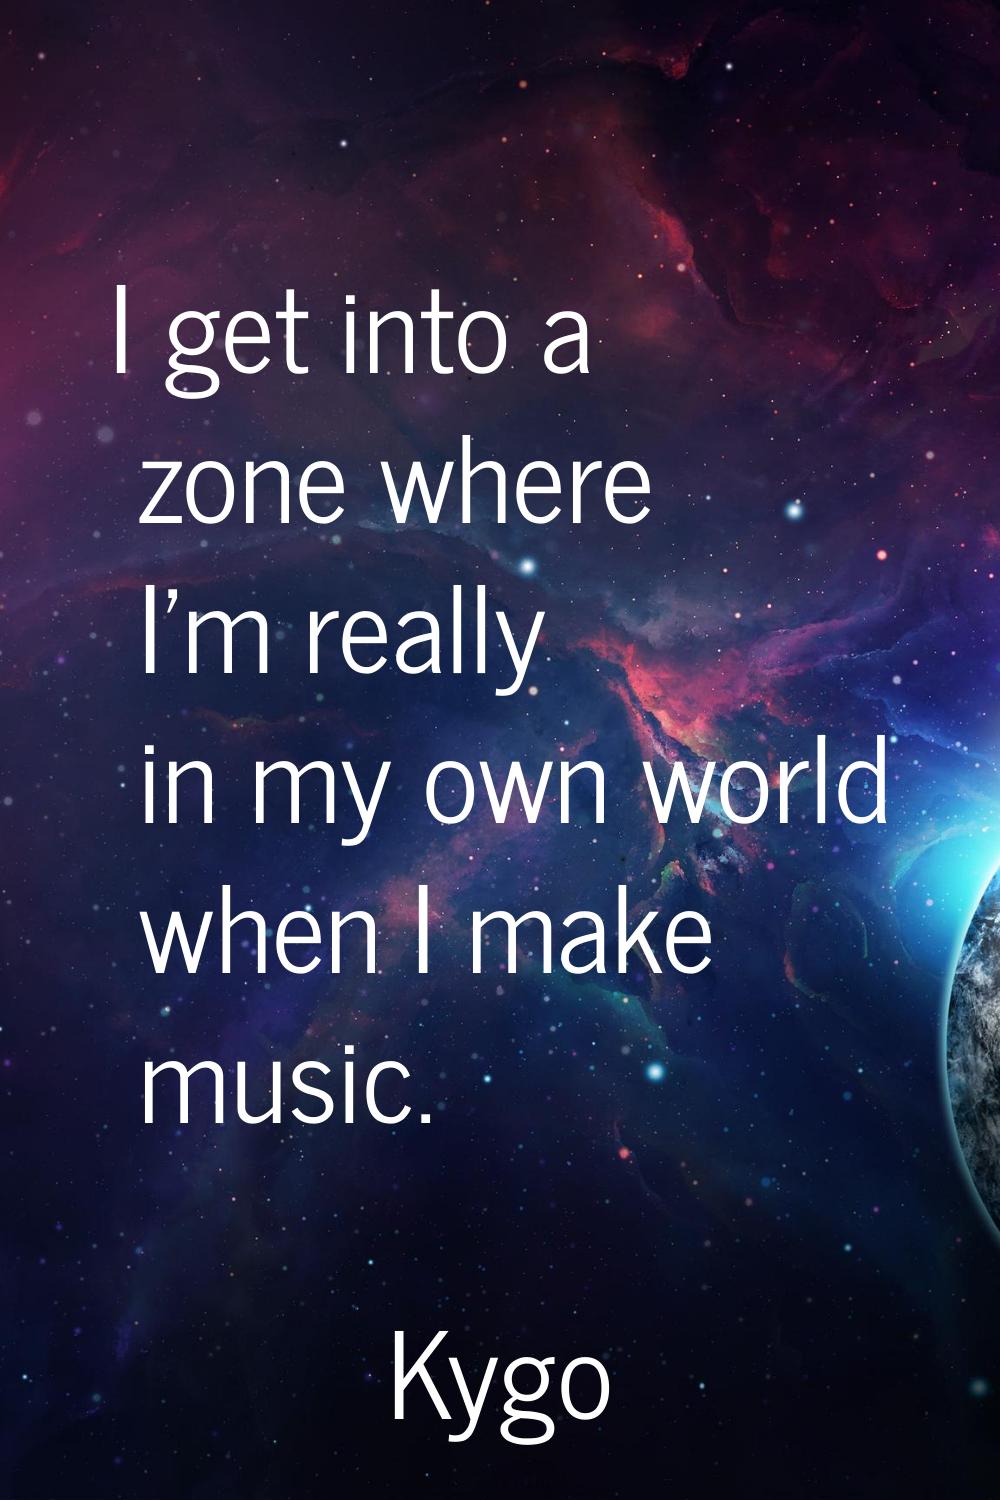 I get into a zone where I'm really in my own world when I make music.